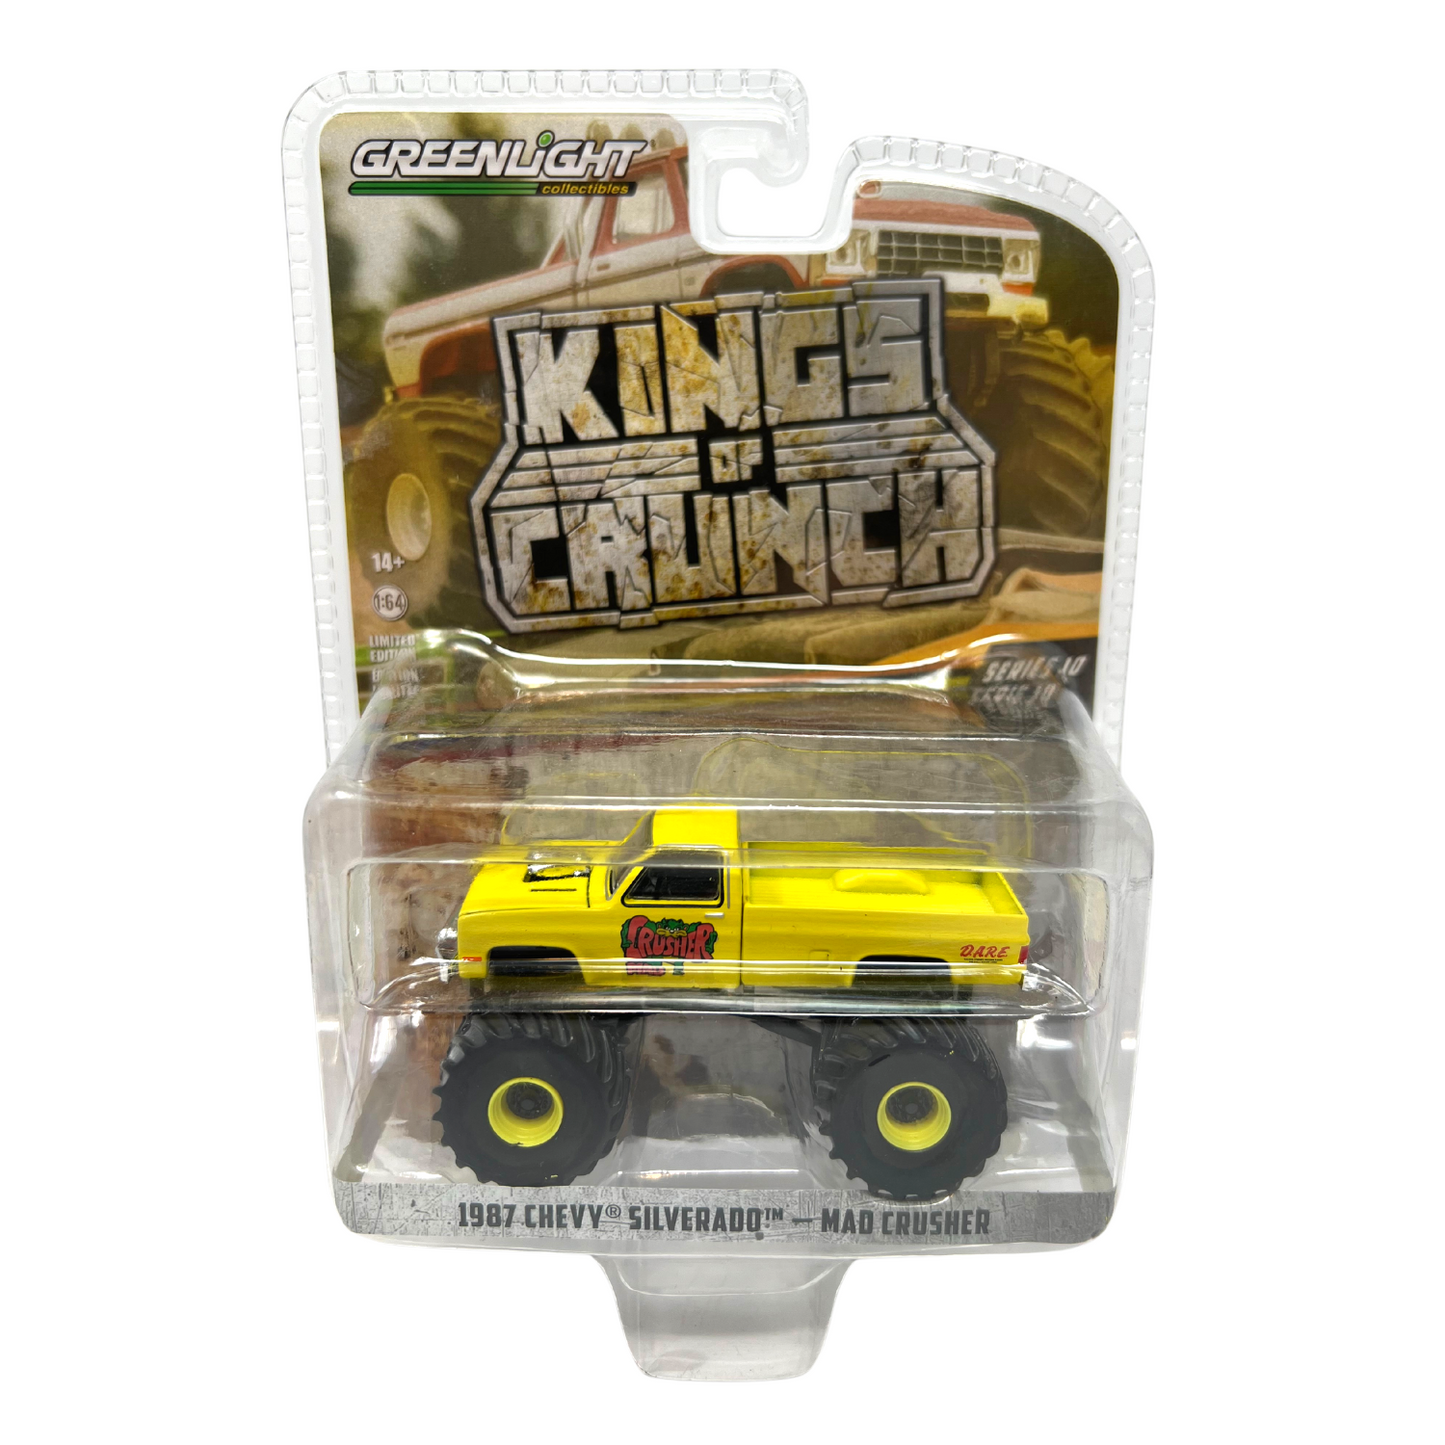 Greenlight Kings of Crunch Series 10 Chevy Silverado Mad Crusher 1:64 Diecast